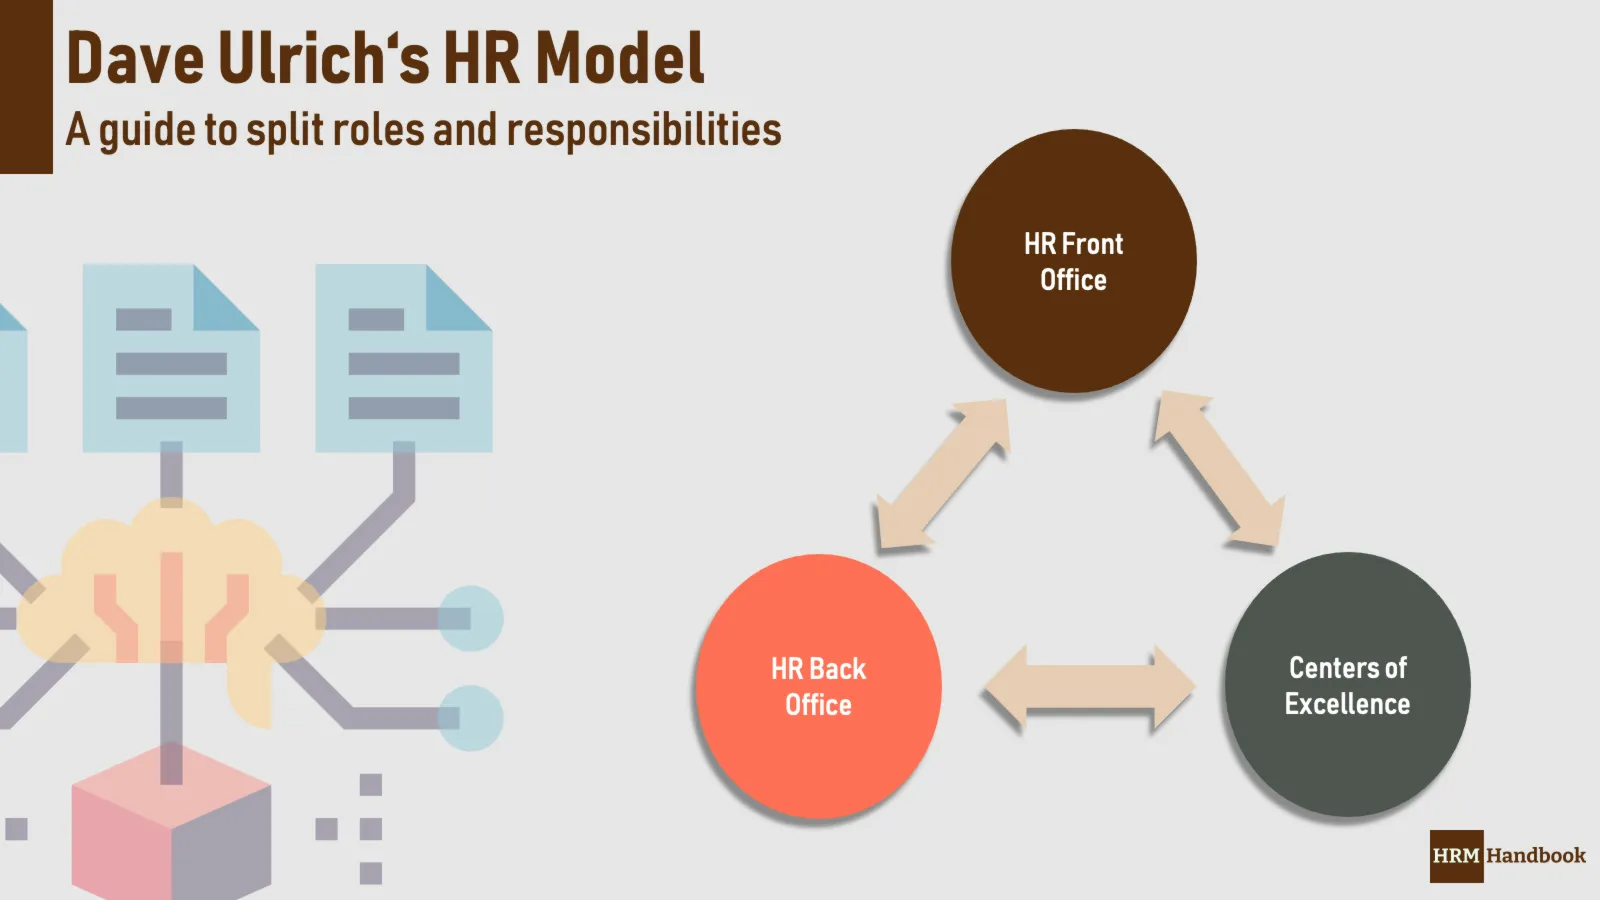 Common HR Functions resulting from HR Model by Dave Ulrich